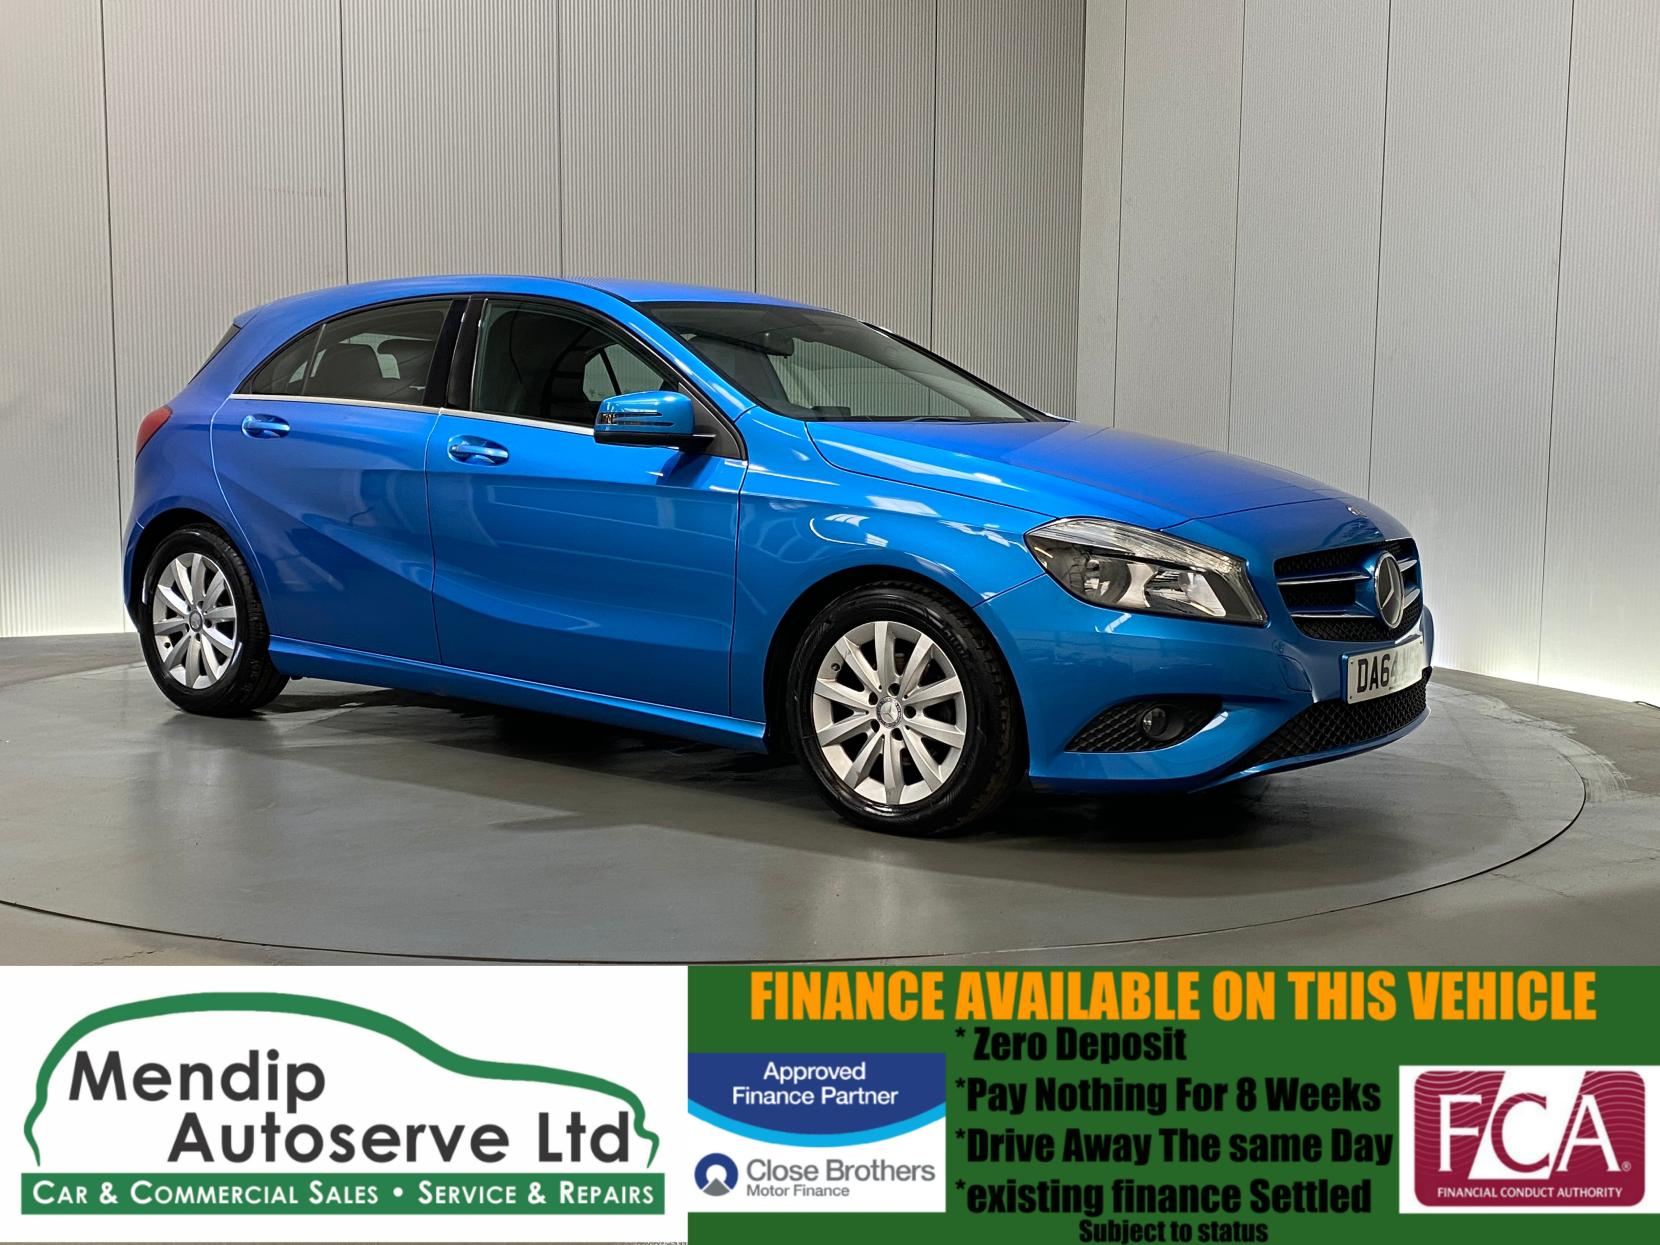 Mercedes-Benz A Class 1.5 A180 CDI ECO SE Hatchback 5dr Diesel Manual Euro 5 (s/s) (109 ps)